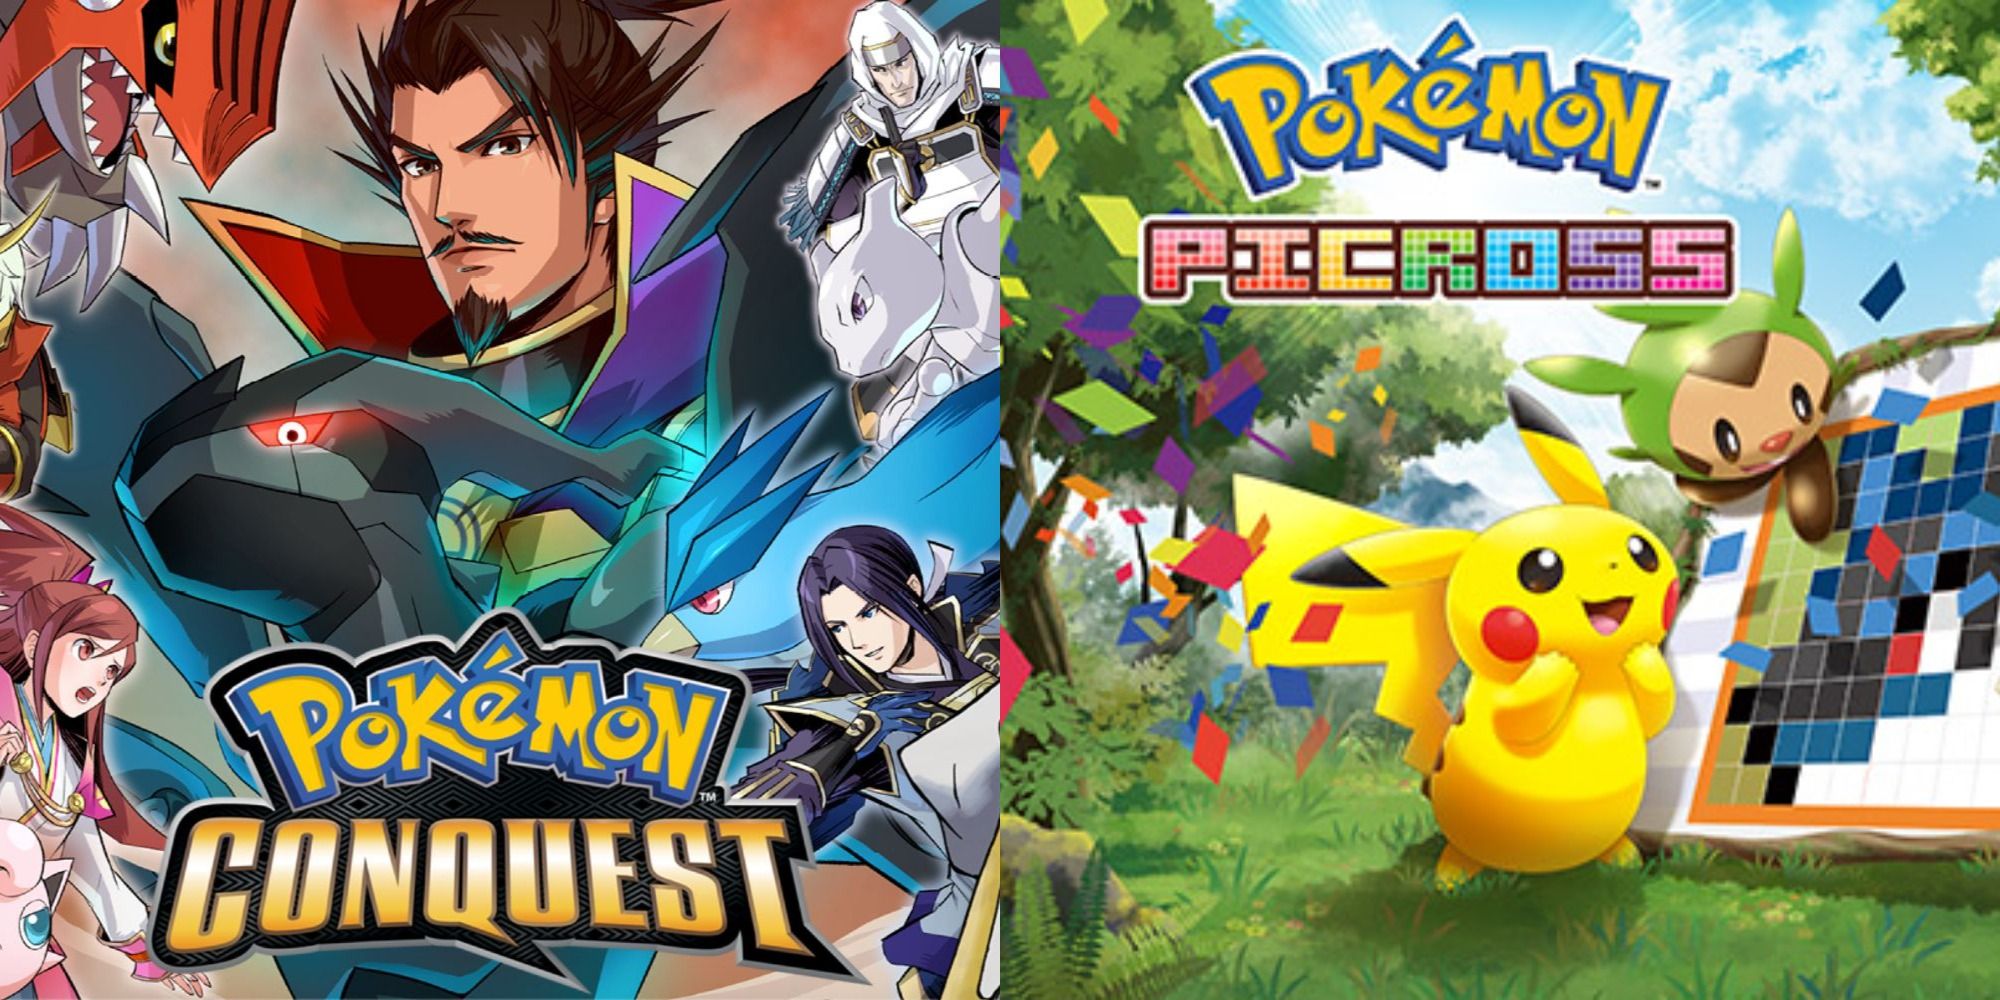 Pokémon-Spin-Off-Games-Conquest-Picross